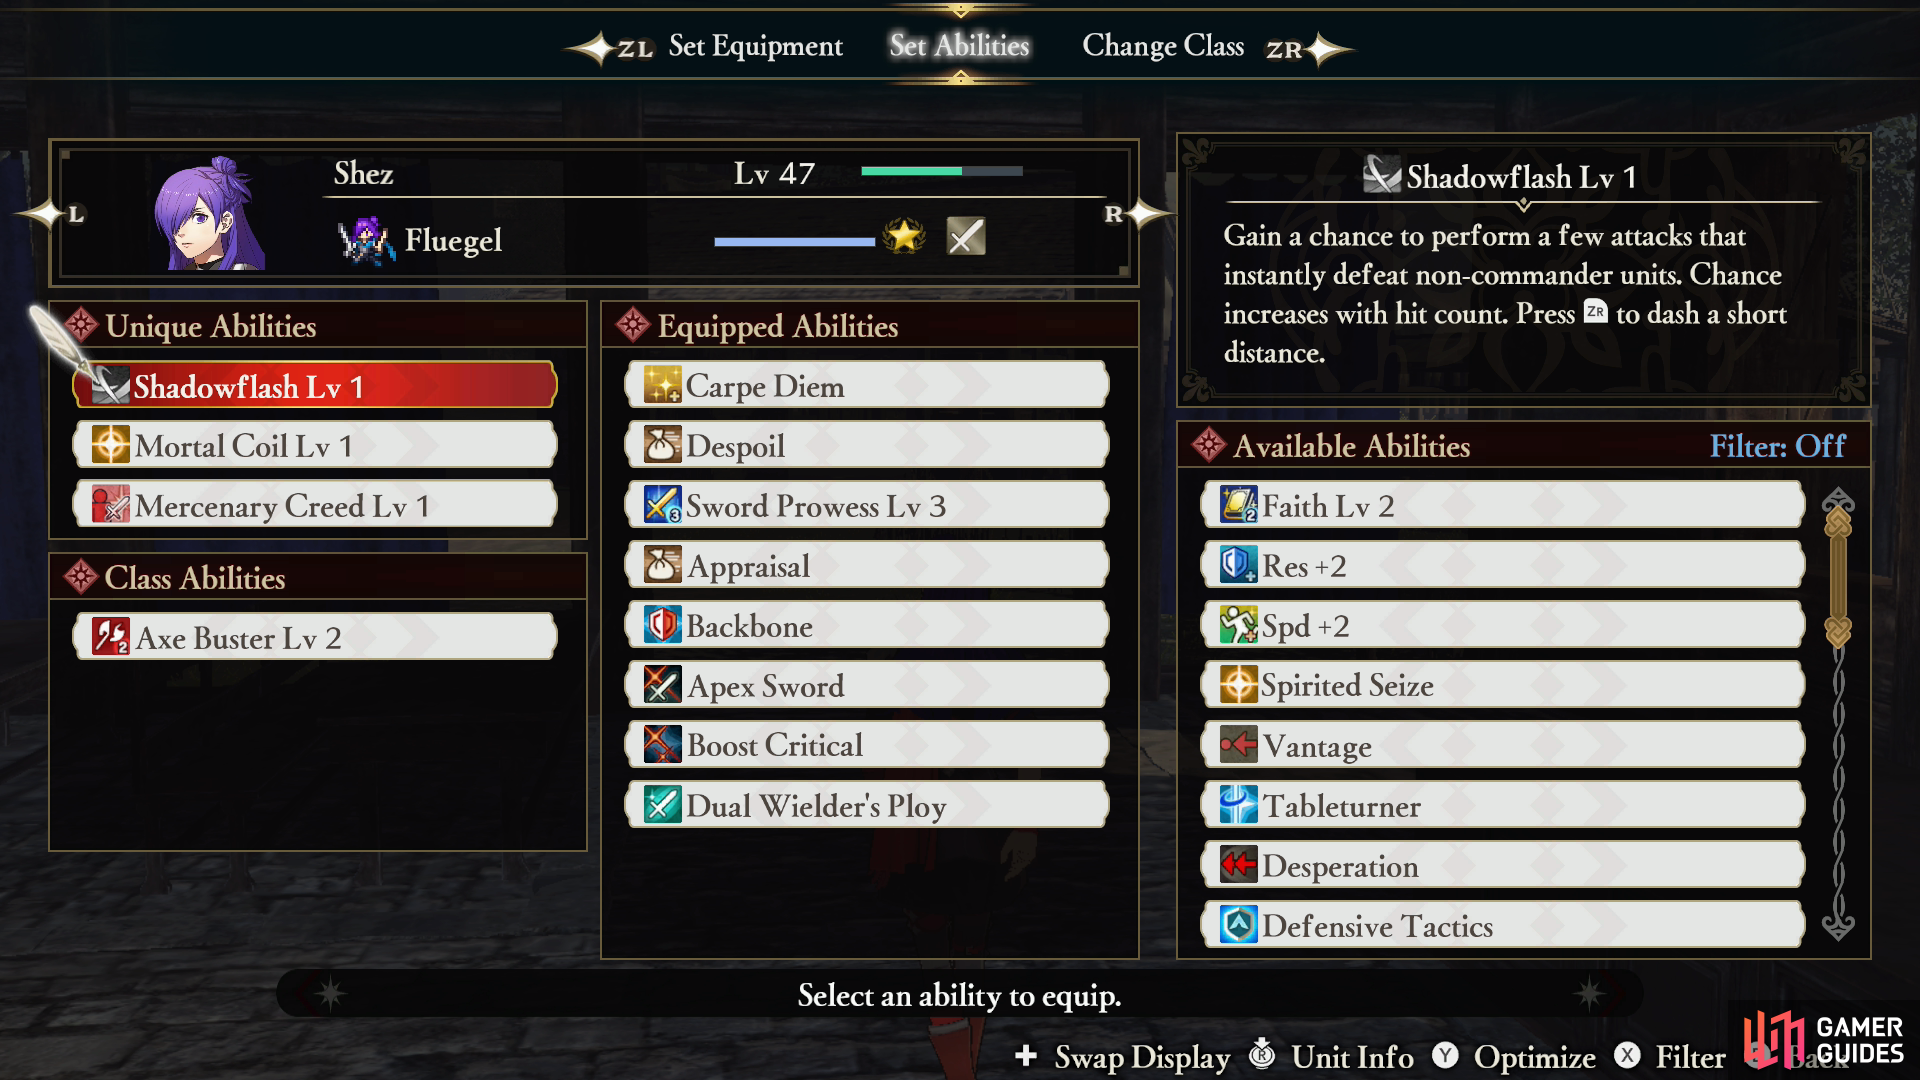 Each character has three Unique Abilities that can be improved via the Tactics Academy, but can otherwise not be removed, exchanged or altered.